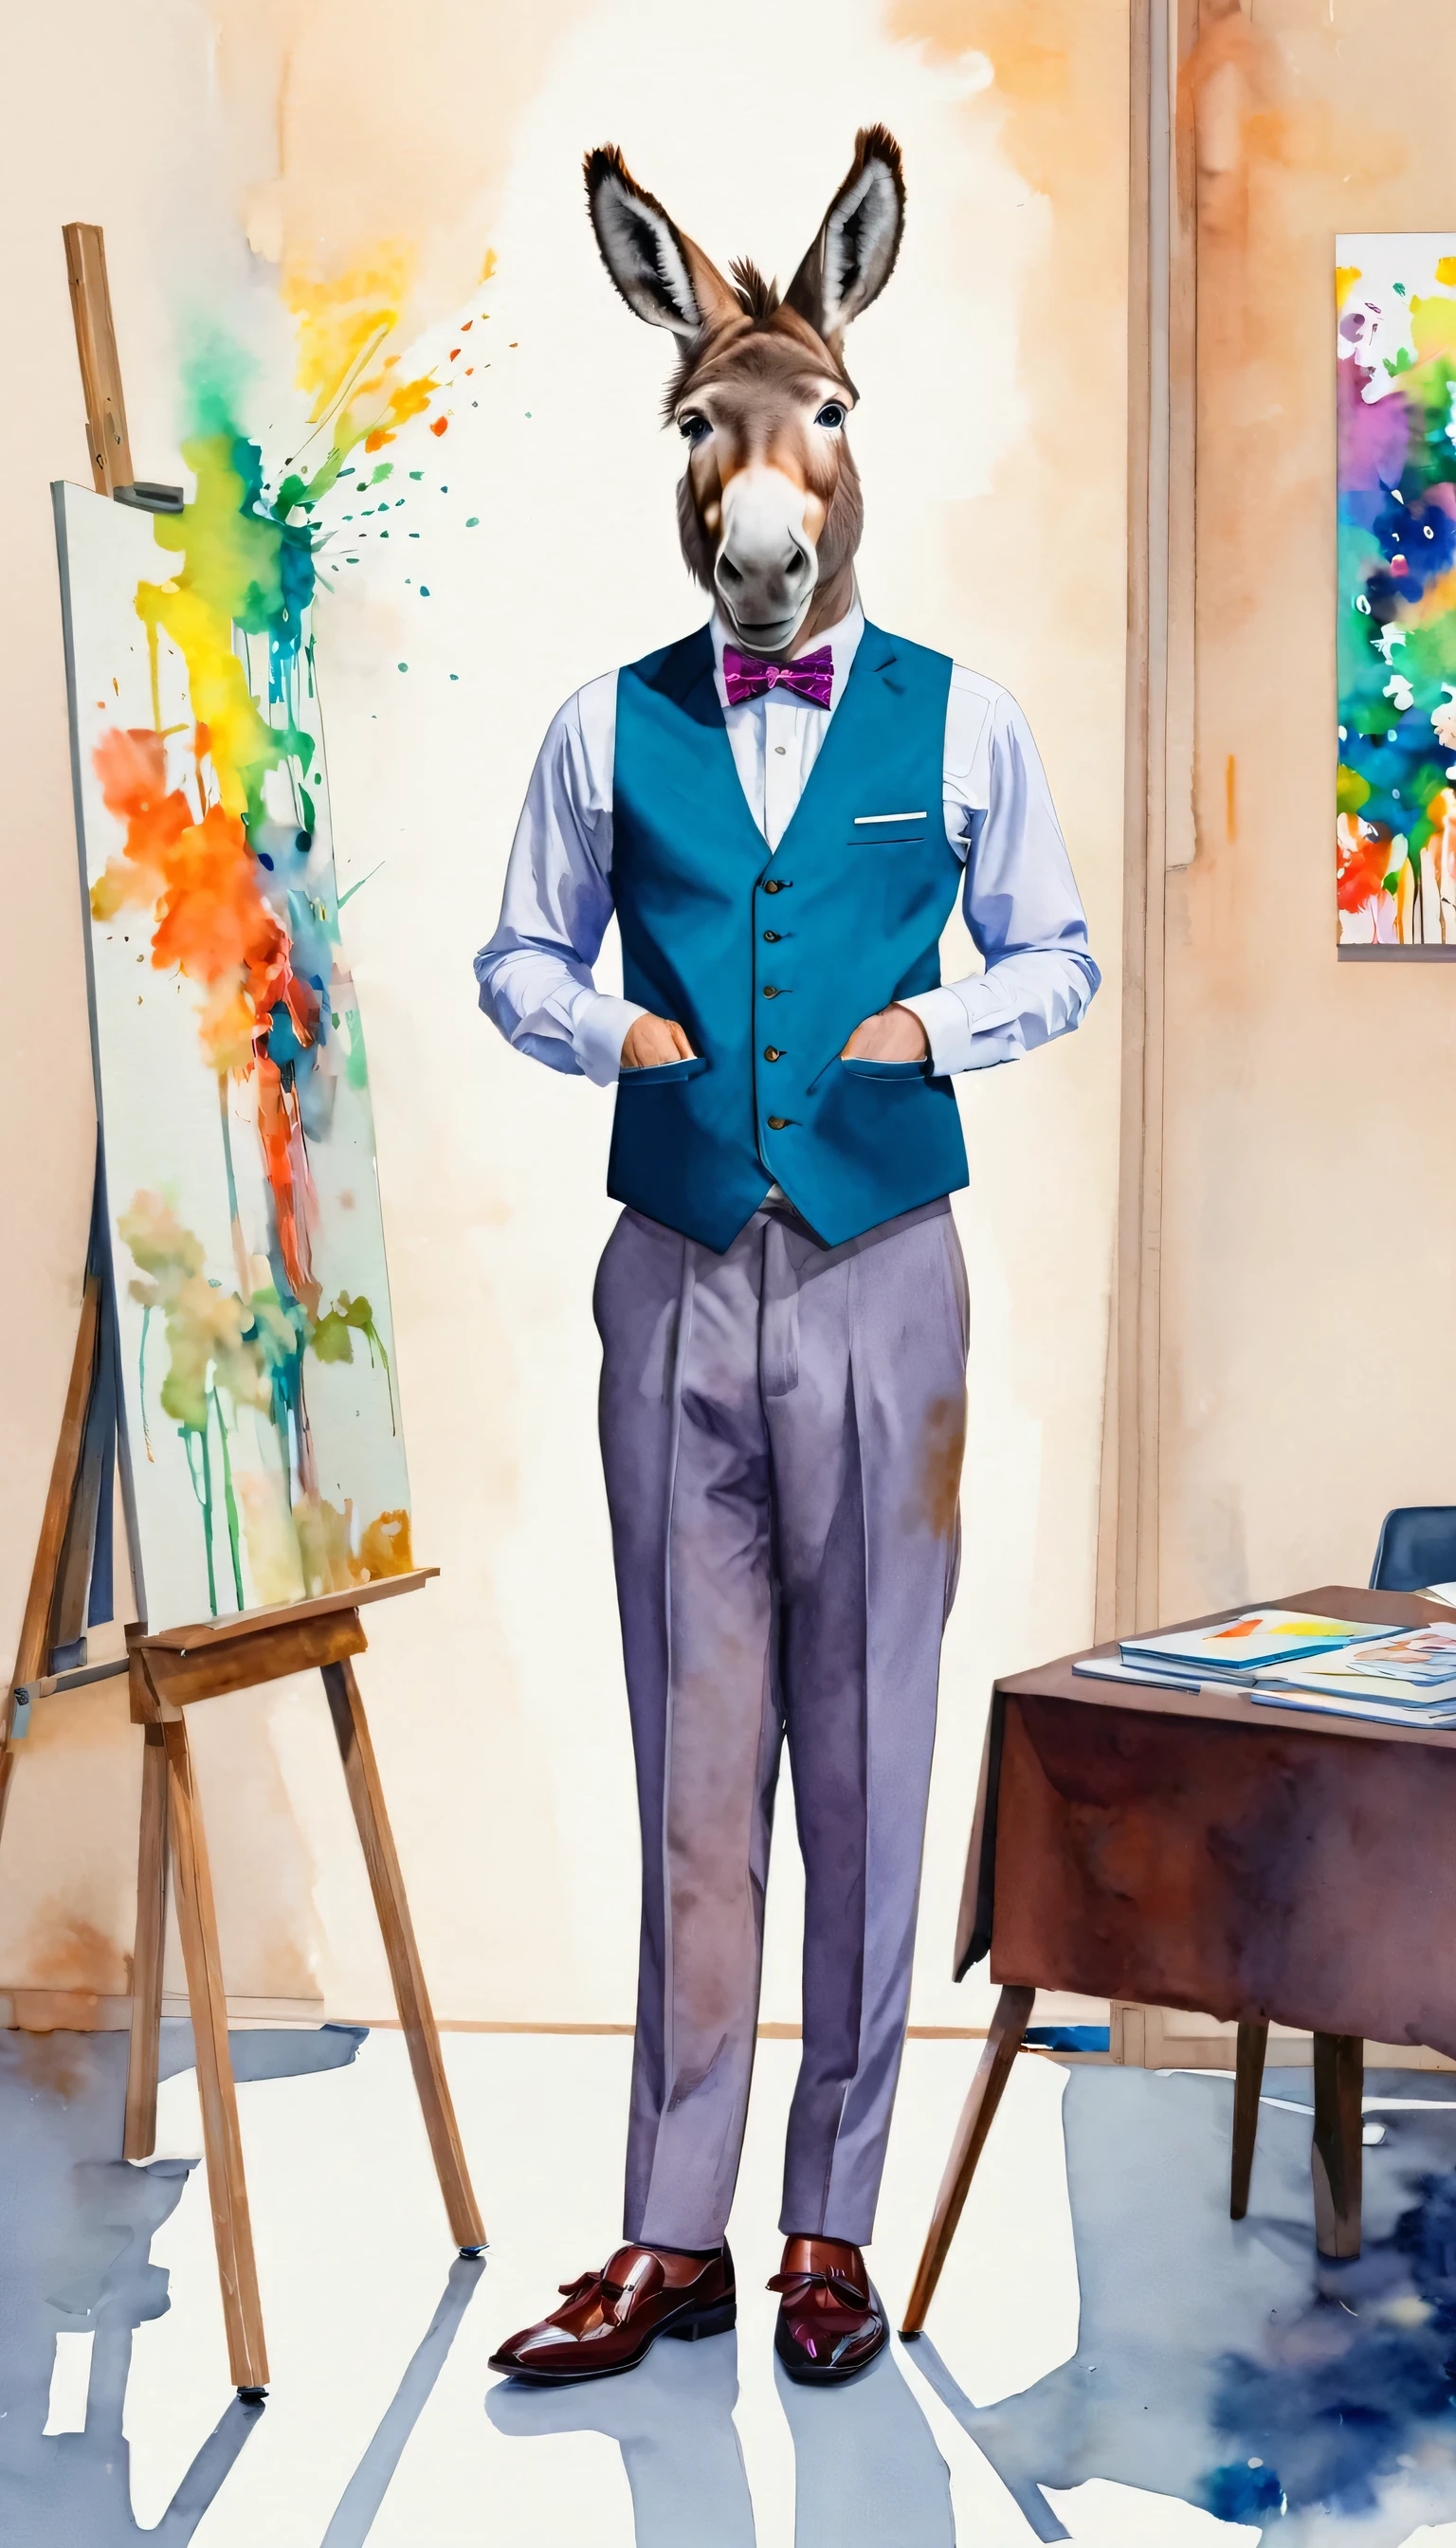 funny donkey in a suit and tie indoors, standing near a table, wearing formal attire, indoors, table, bowtie, bow, standing, pants, jacket, vest, furry, formal, suit, white shirt, shoes, pants, office, chair, full body, looking at viewer, modern art, painting, drawing, watercolor painting, psychedelic colors